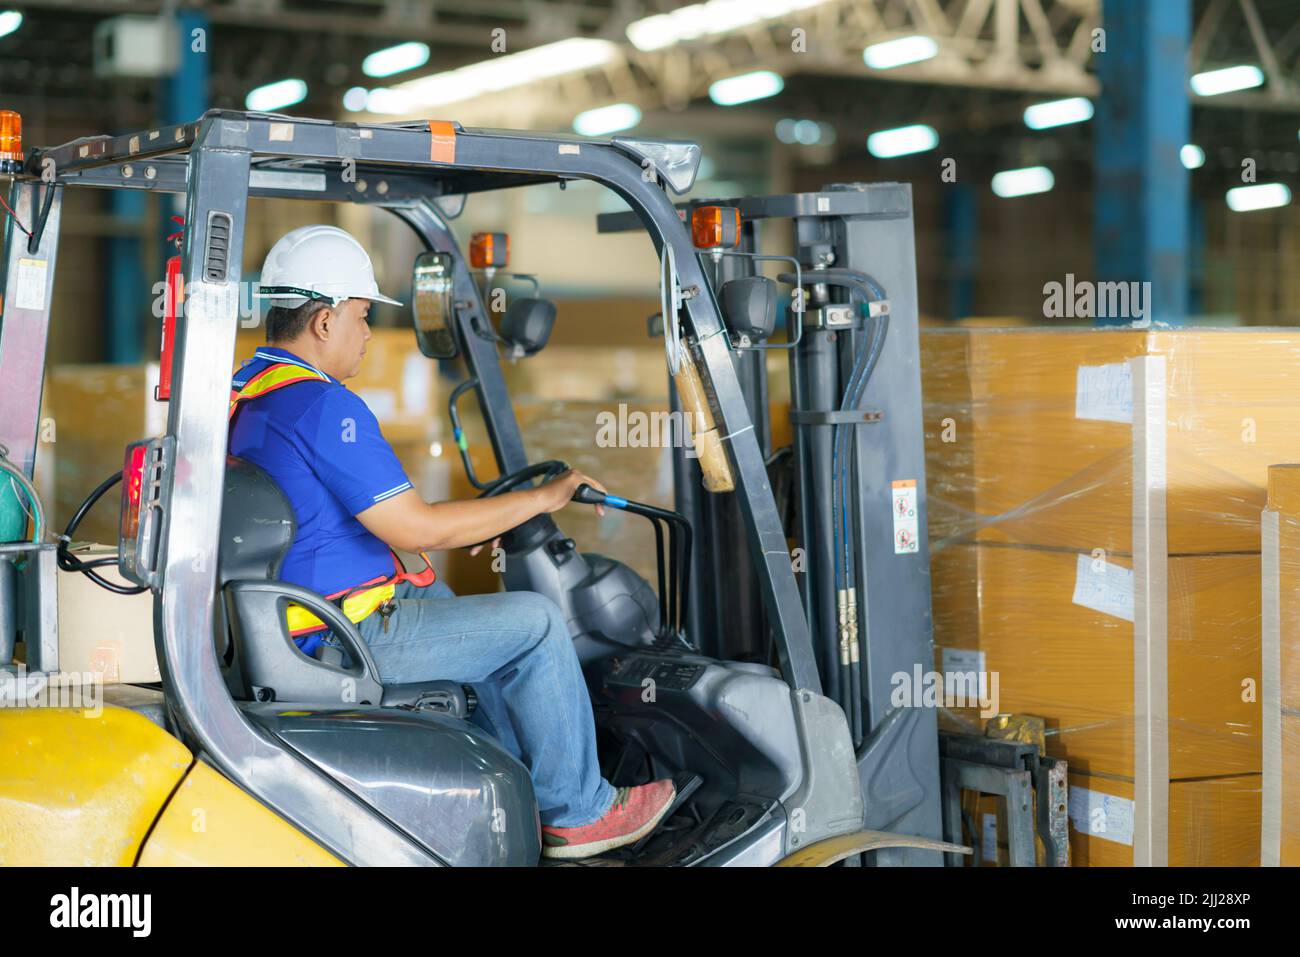 Forklift are loading into cargo containers at warehouses, ports, freight forwarding, cargo supply chains, cargo transportation, warehouse industry, lo Stock Photo